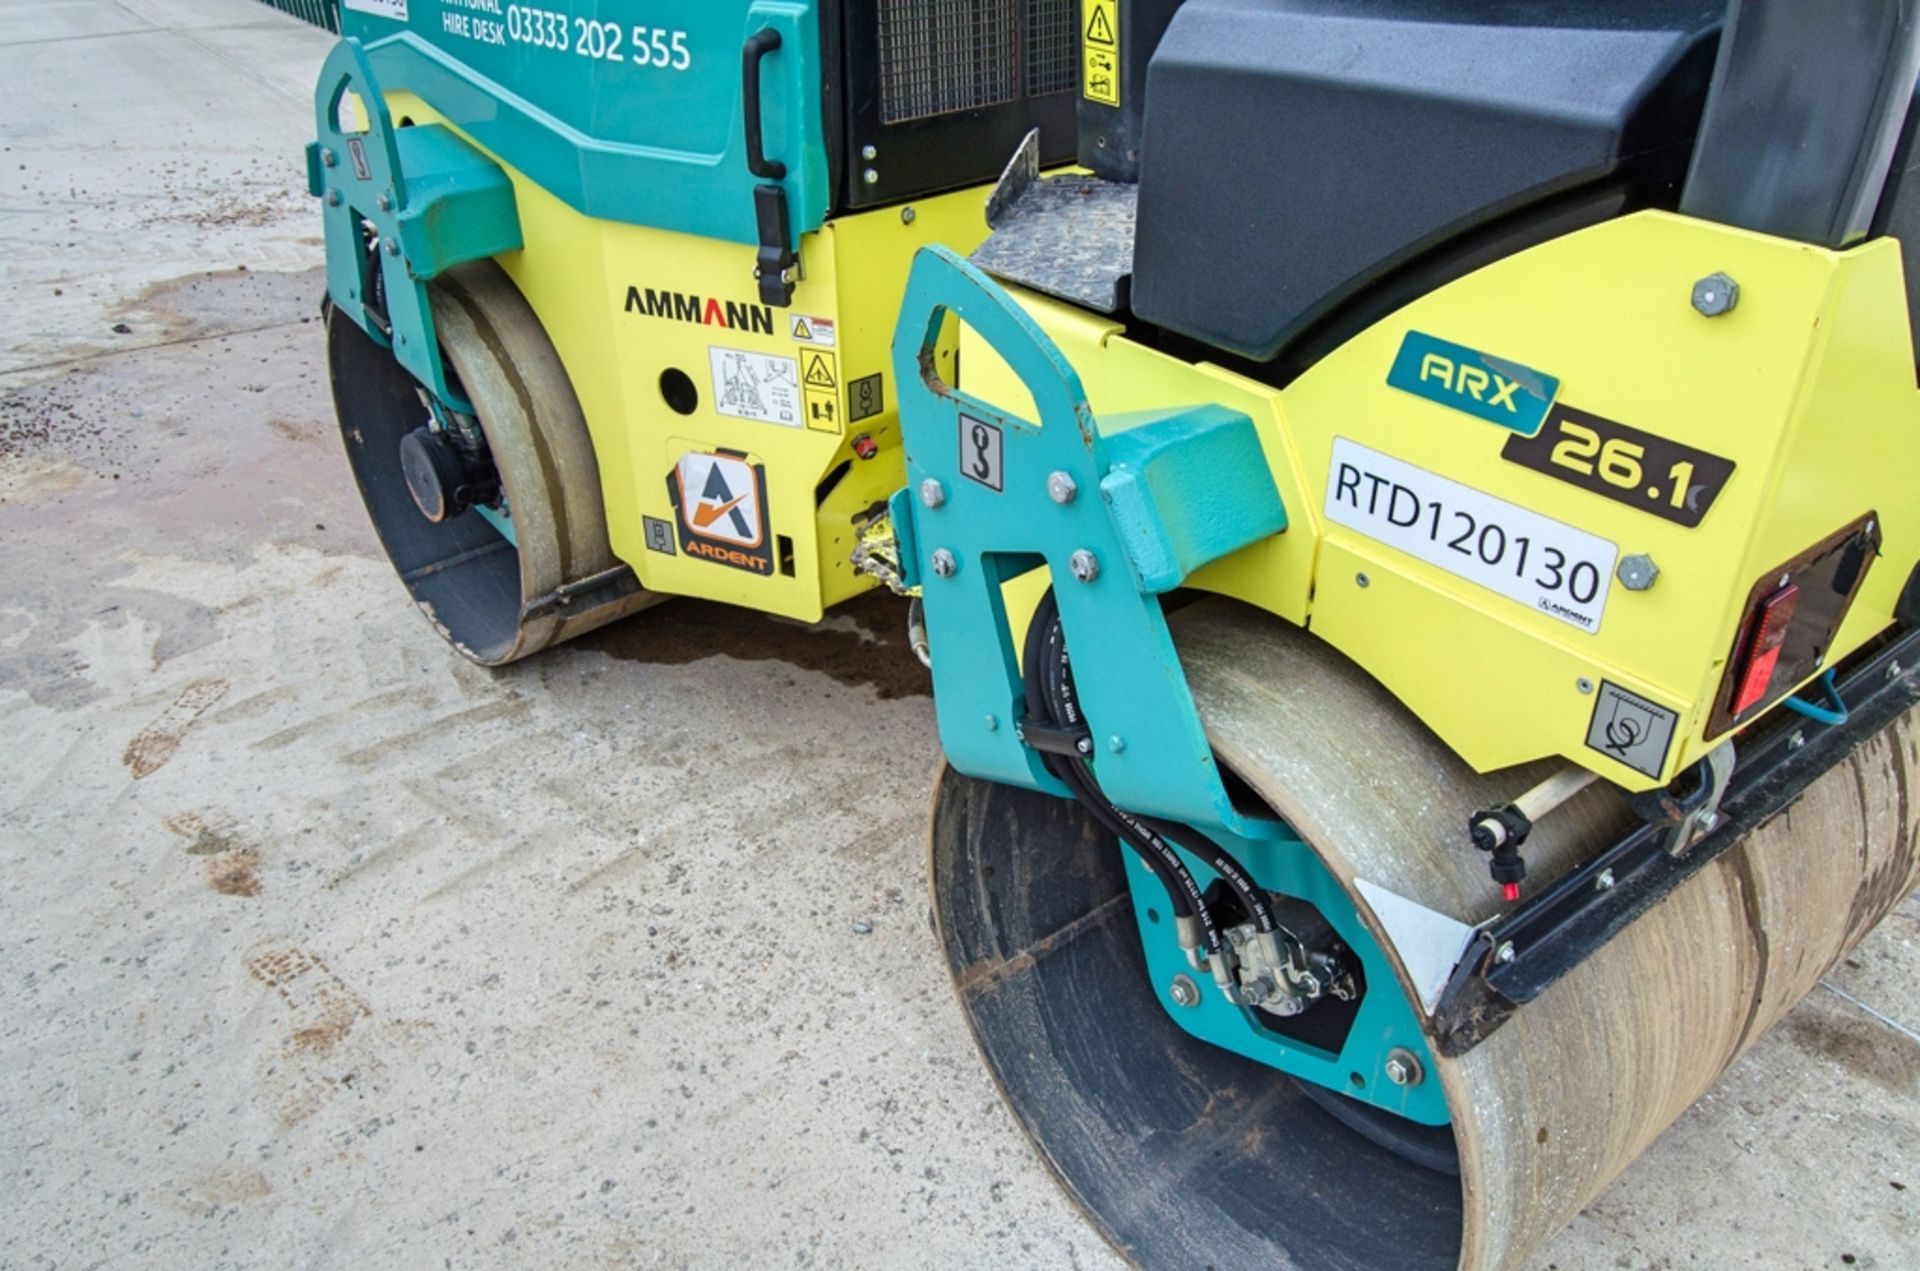 Ammann ARX 26-1 double drum ride on roller Year: 2022 S/N: 3023580 Recorded Hours: 225 RTD120130 - Image 11 of 21